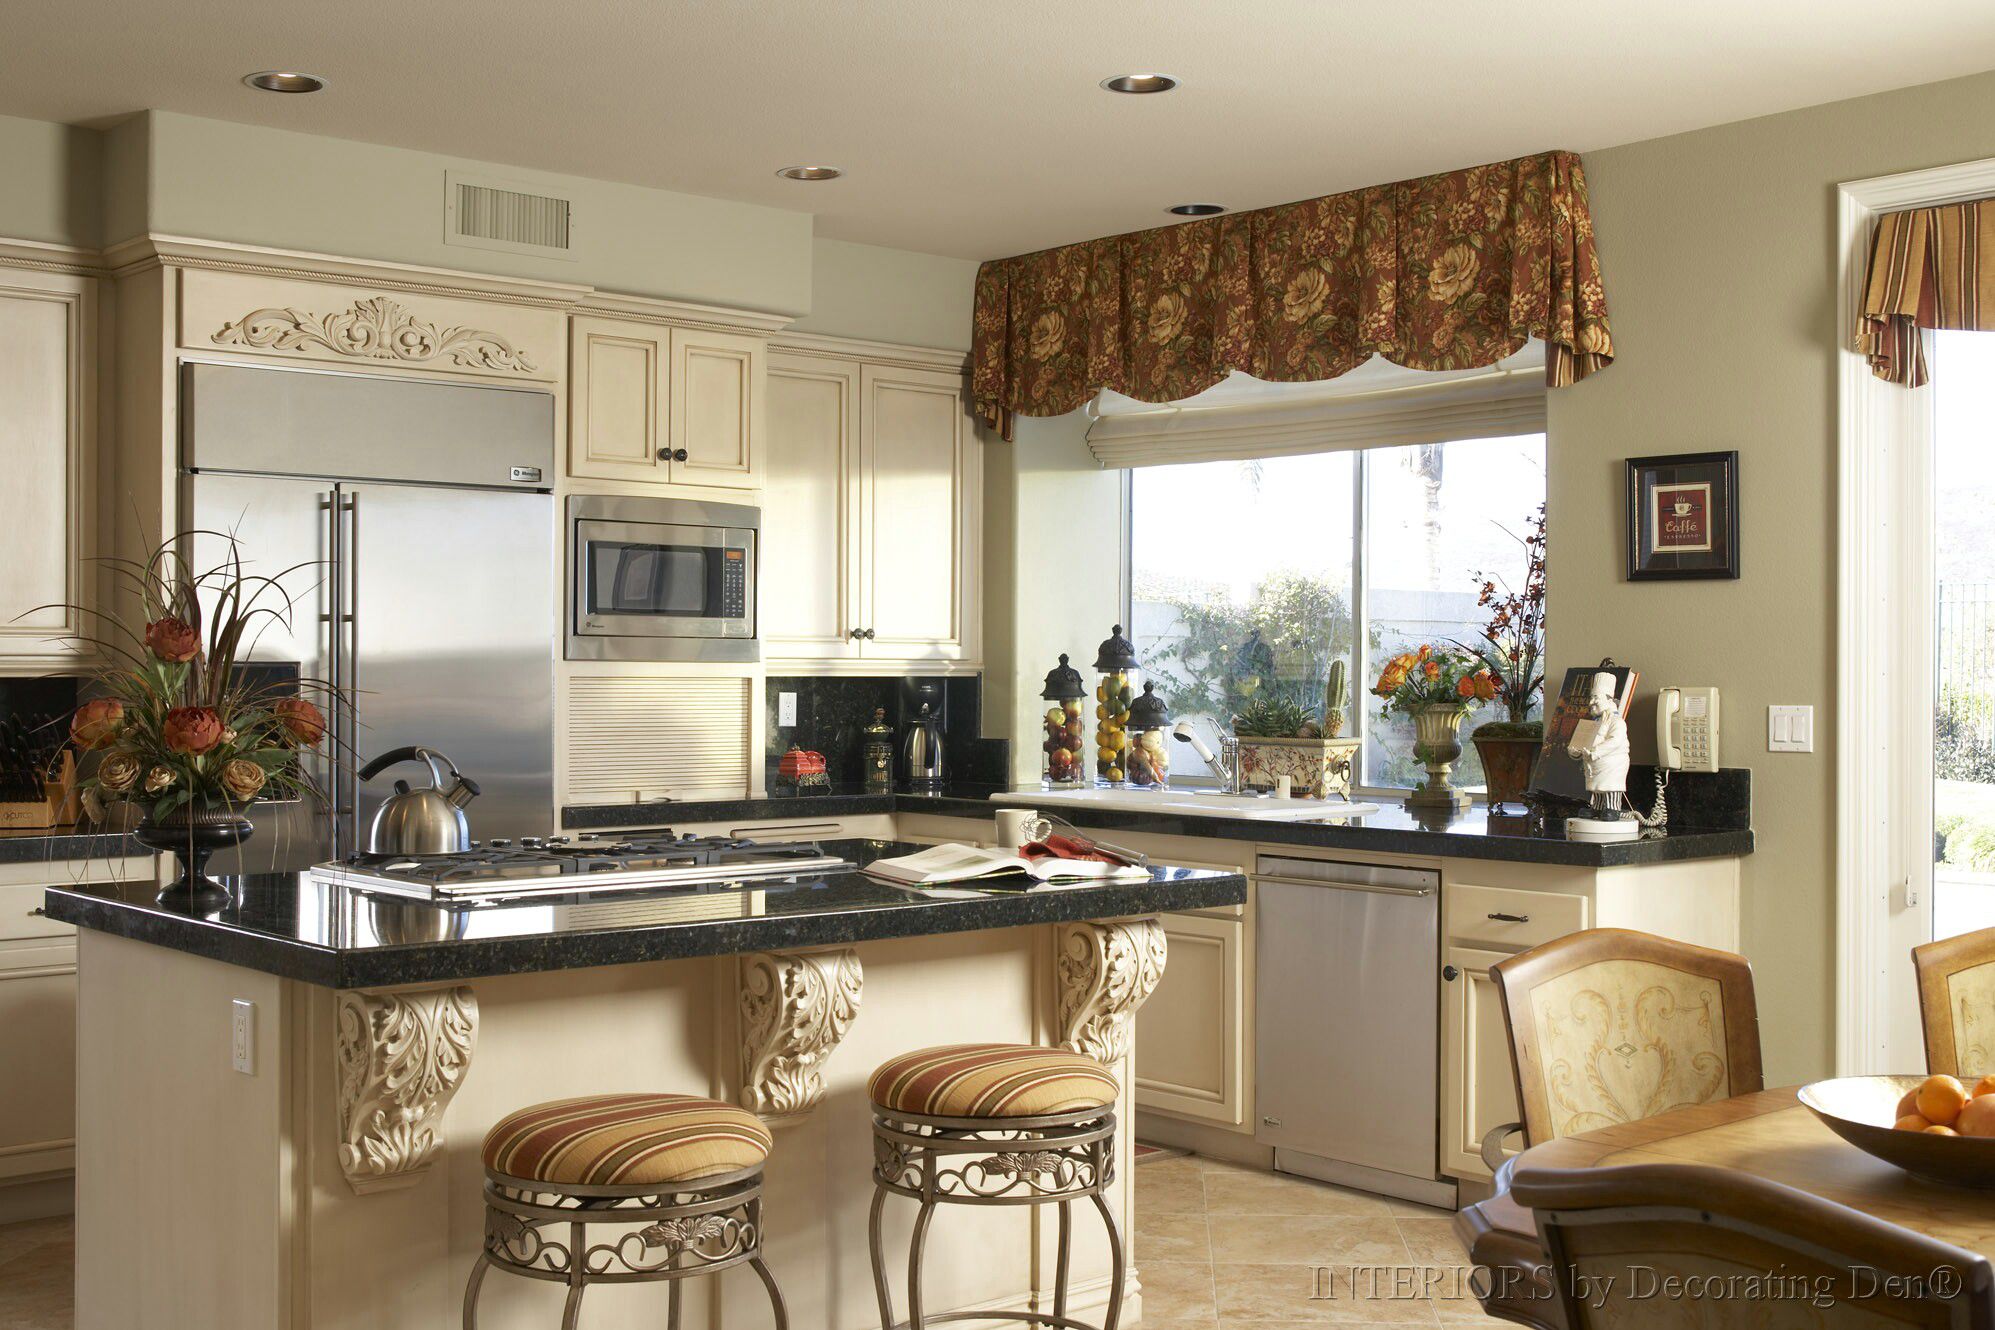 Kitchen Design Wall Marvelous Kitchen Design With Pastel Wall Paint And Double Window Used Amusing Kitchen Curtain Ideas And Cool Counter Model Closed Stools Kitchen Guide To Choose The Appropriate Kitchen Curtain Ideas